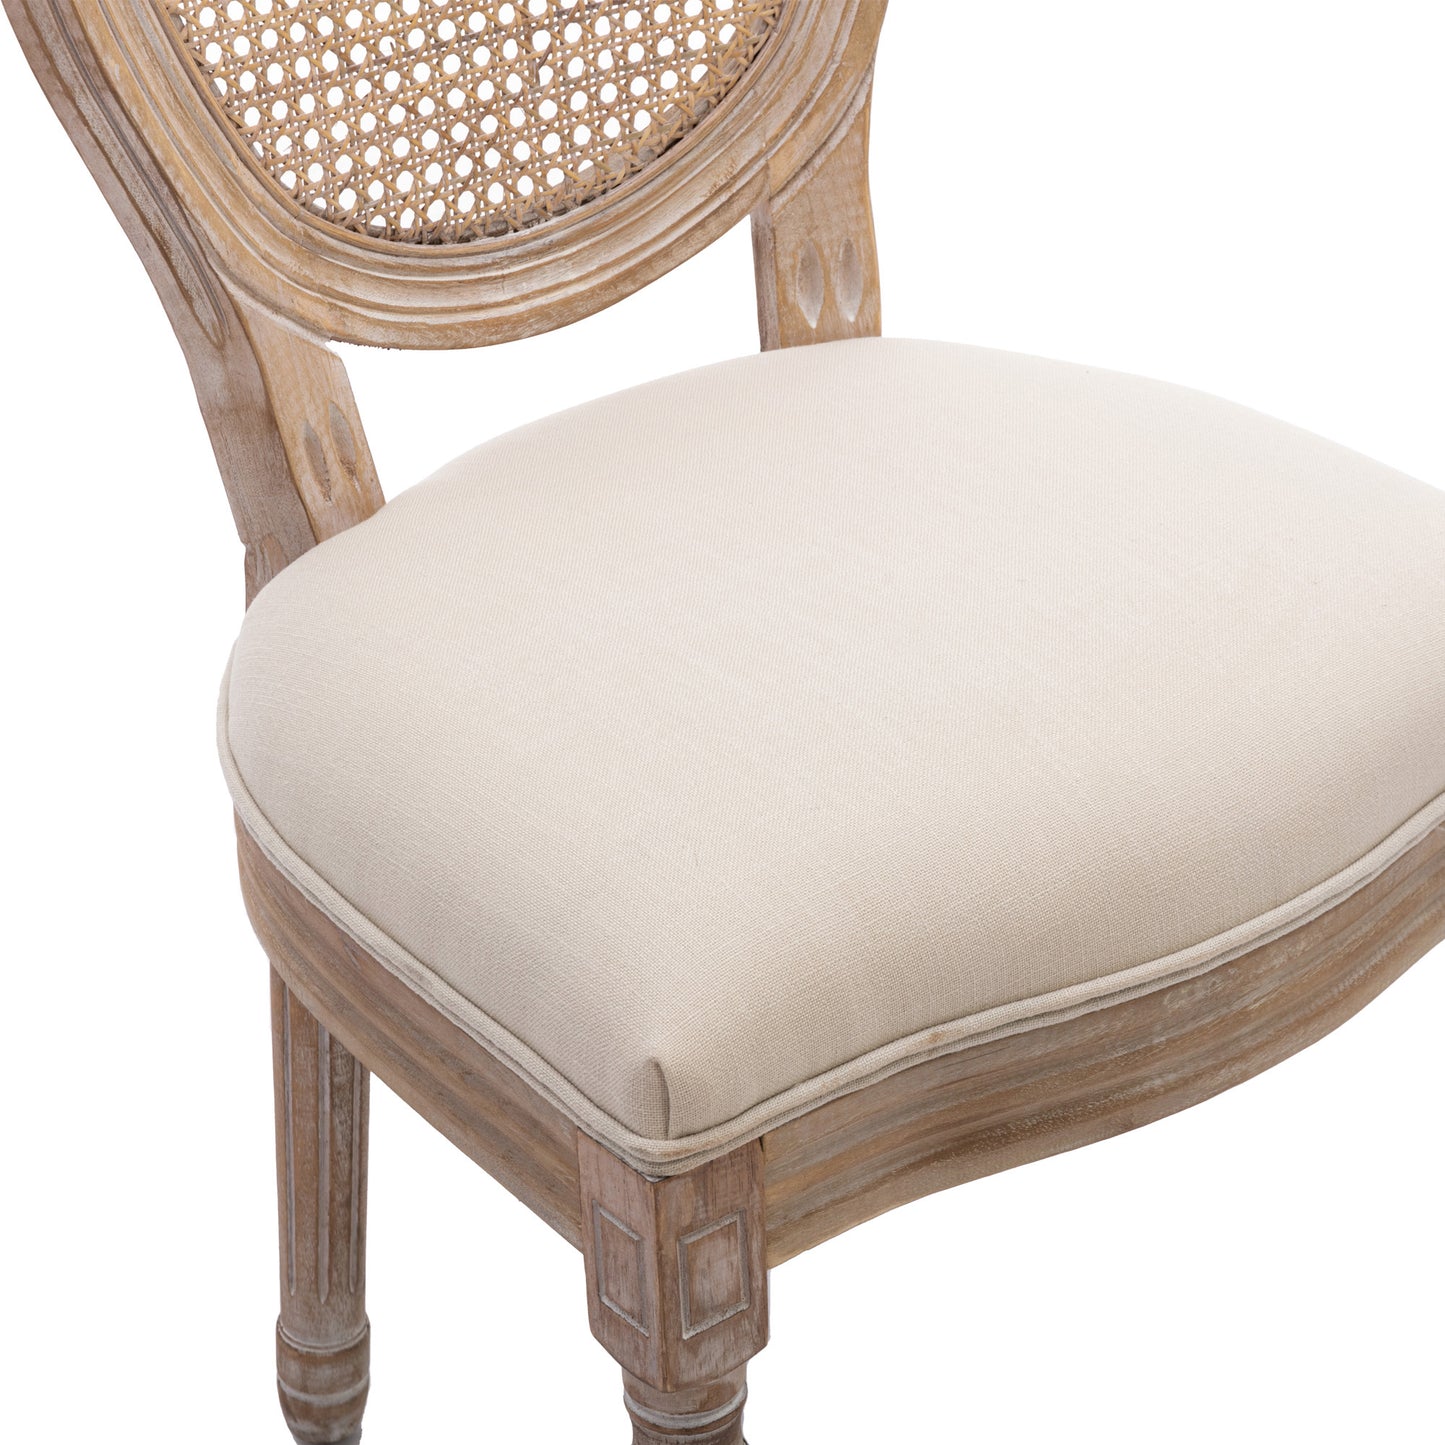 French Country Dining Chair Set of 2 W21248038